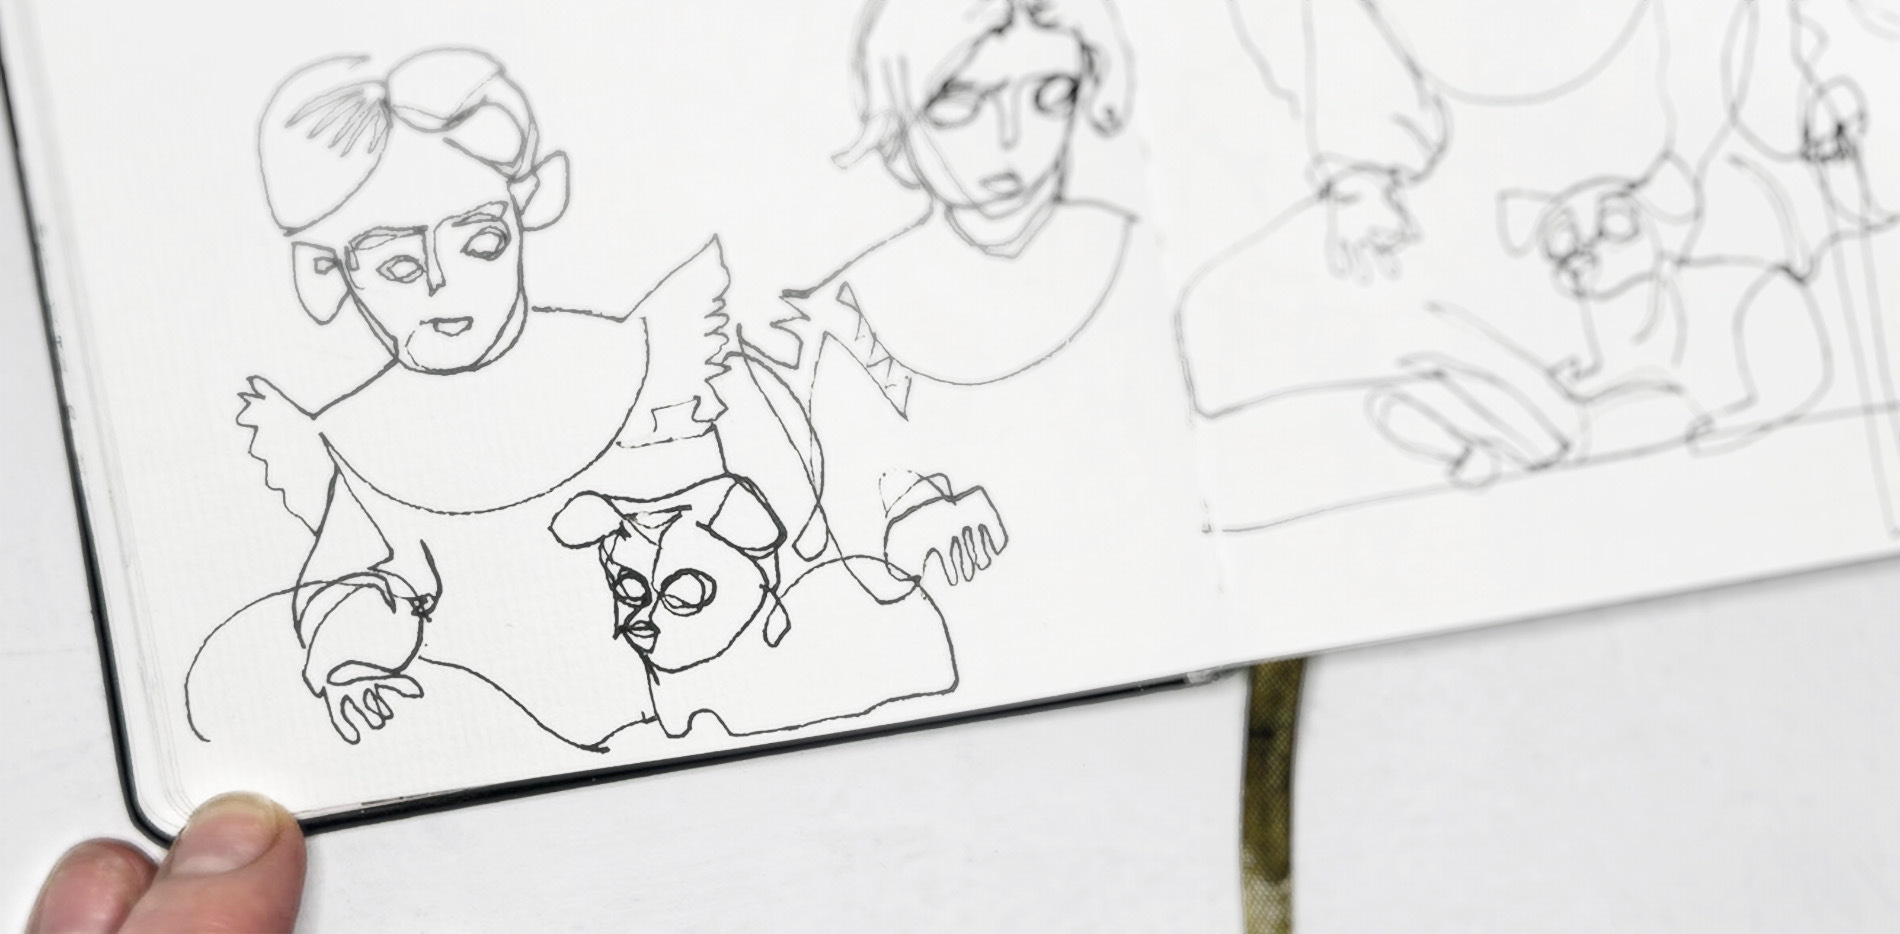 Photograph showing a blurry close-up of blind contour drawings in ink, drawn in a small sketchbook